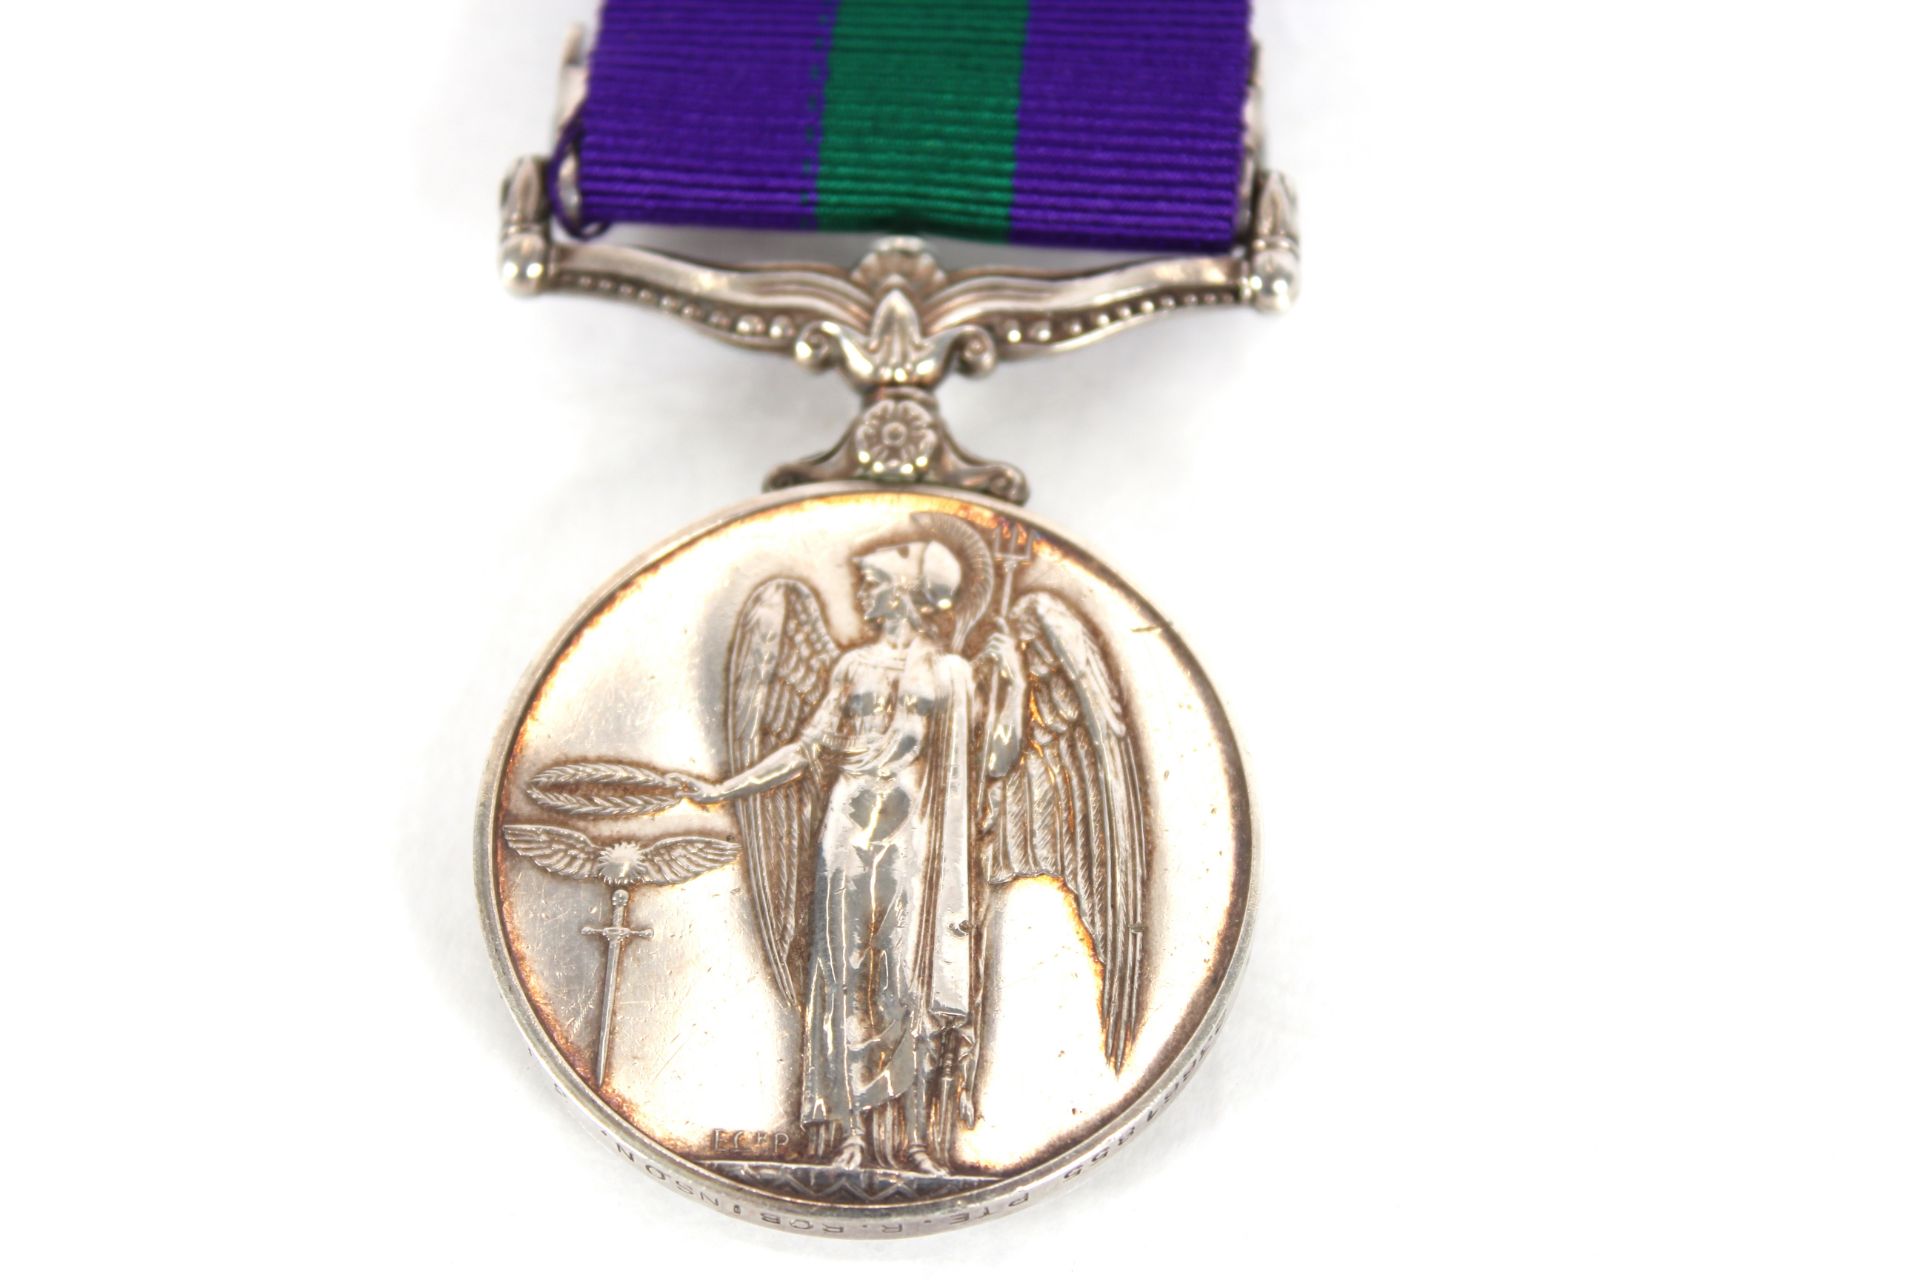 A QEII G.S.M. with Malaya clasp to 23661855 Pte. R - Image 4 of 4